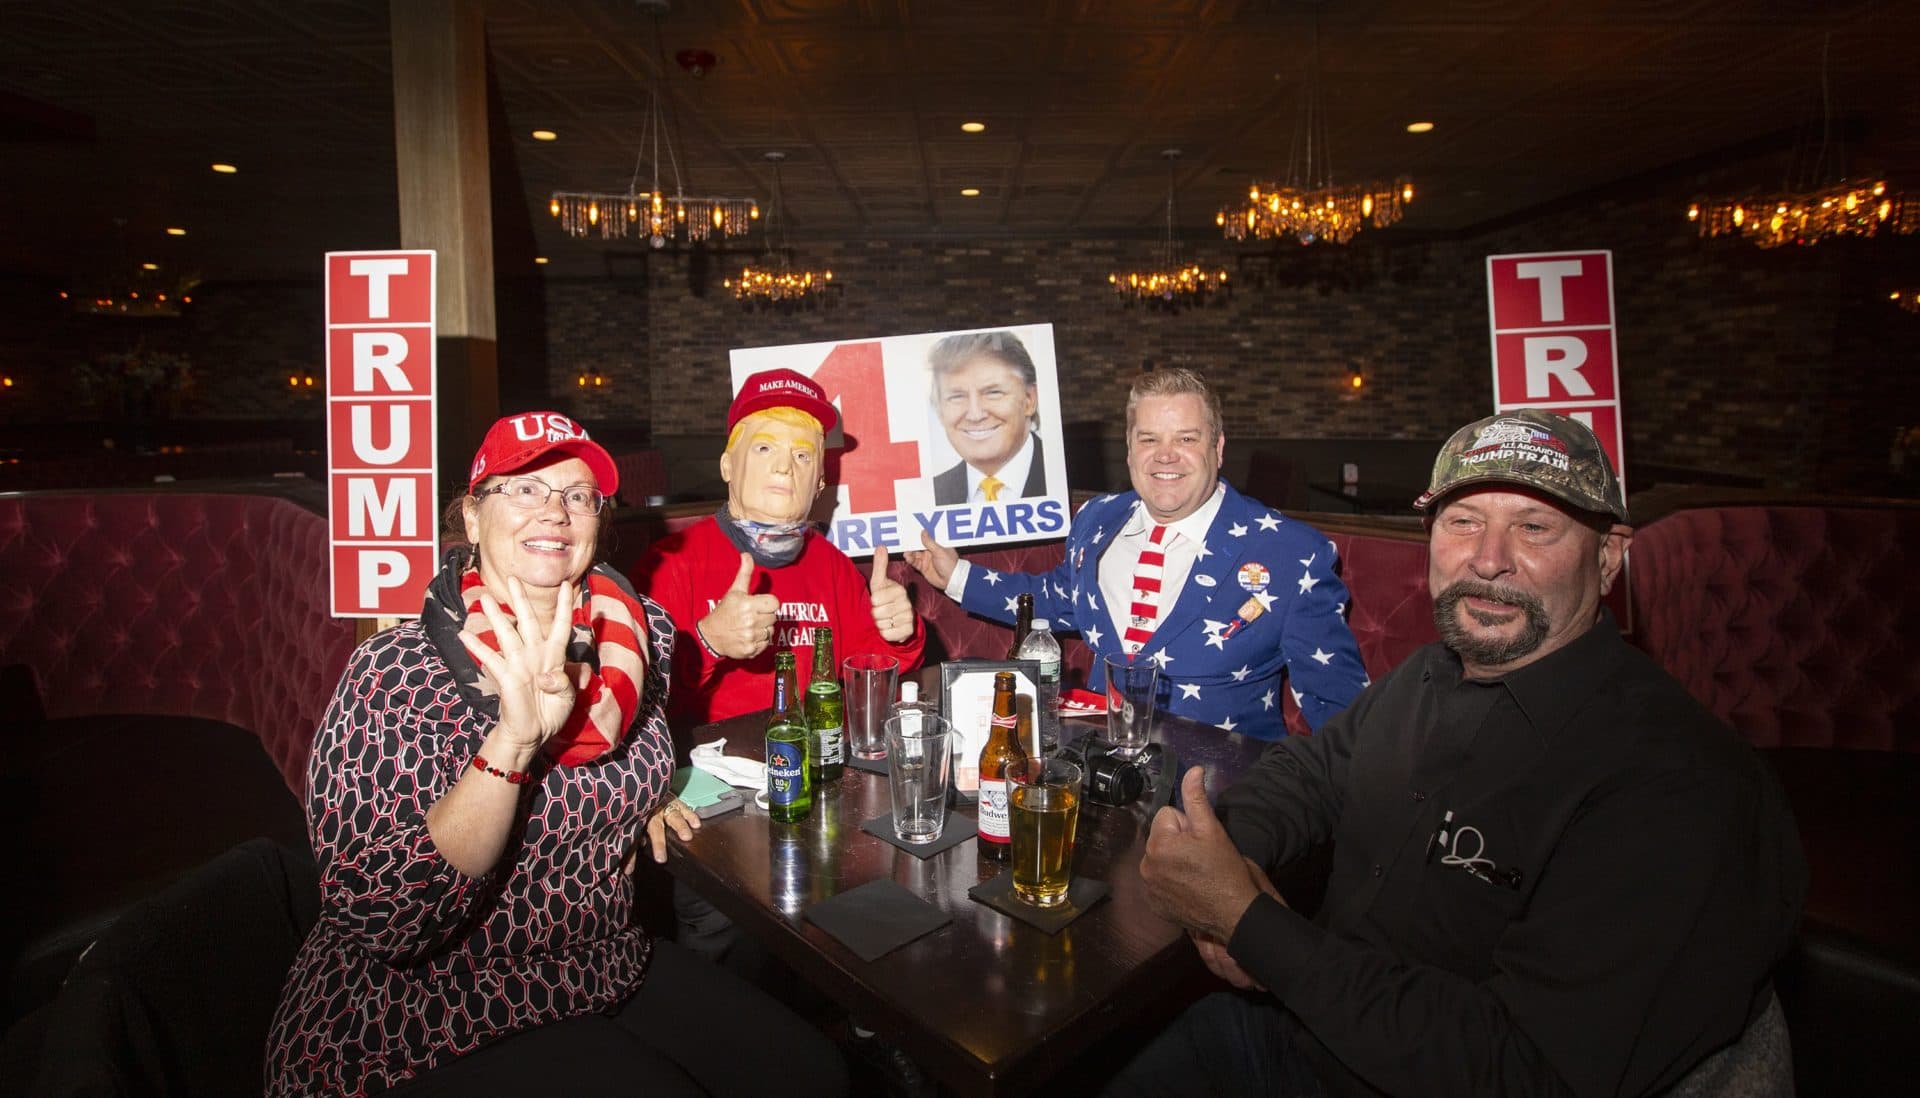 From left to right, Donna Forand, Jim Forand, both of Carver, Richard Desrosiers, of Fairhaven and Steven Miller, of New Bedford, at a watch party for President Donald Trump in Weymouth. (Joe Difazio for WBUR)